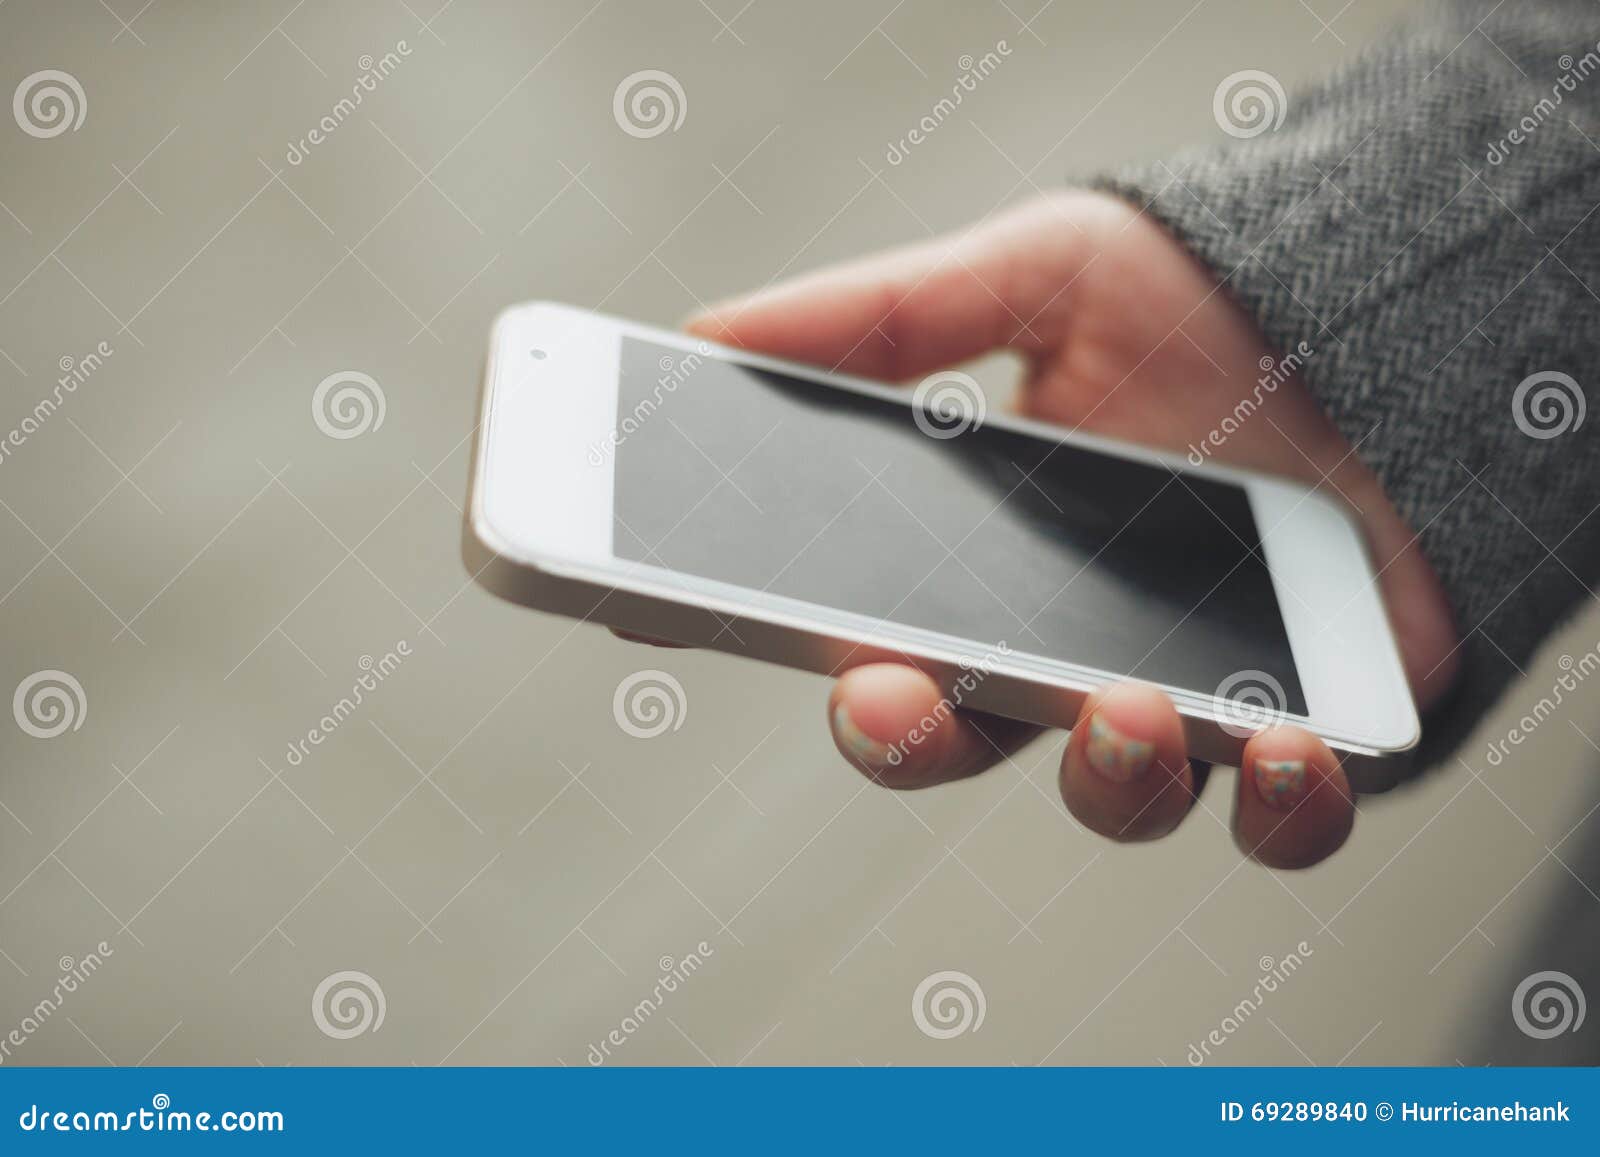 Smart Phone with Frontal Camera in Female Hand Stock Photo - Image of ...